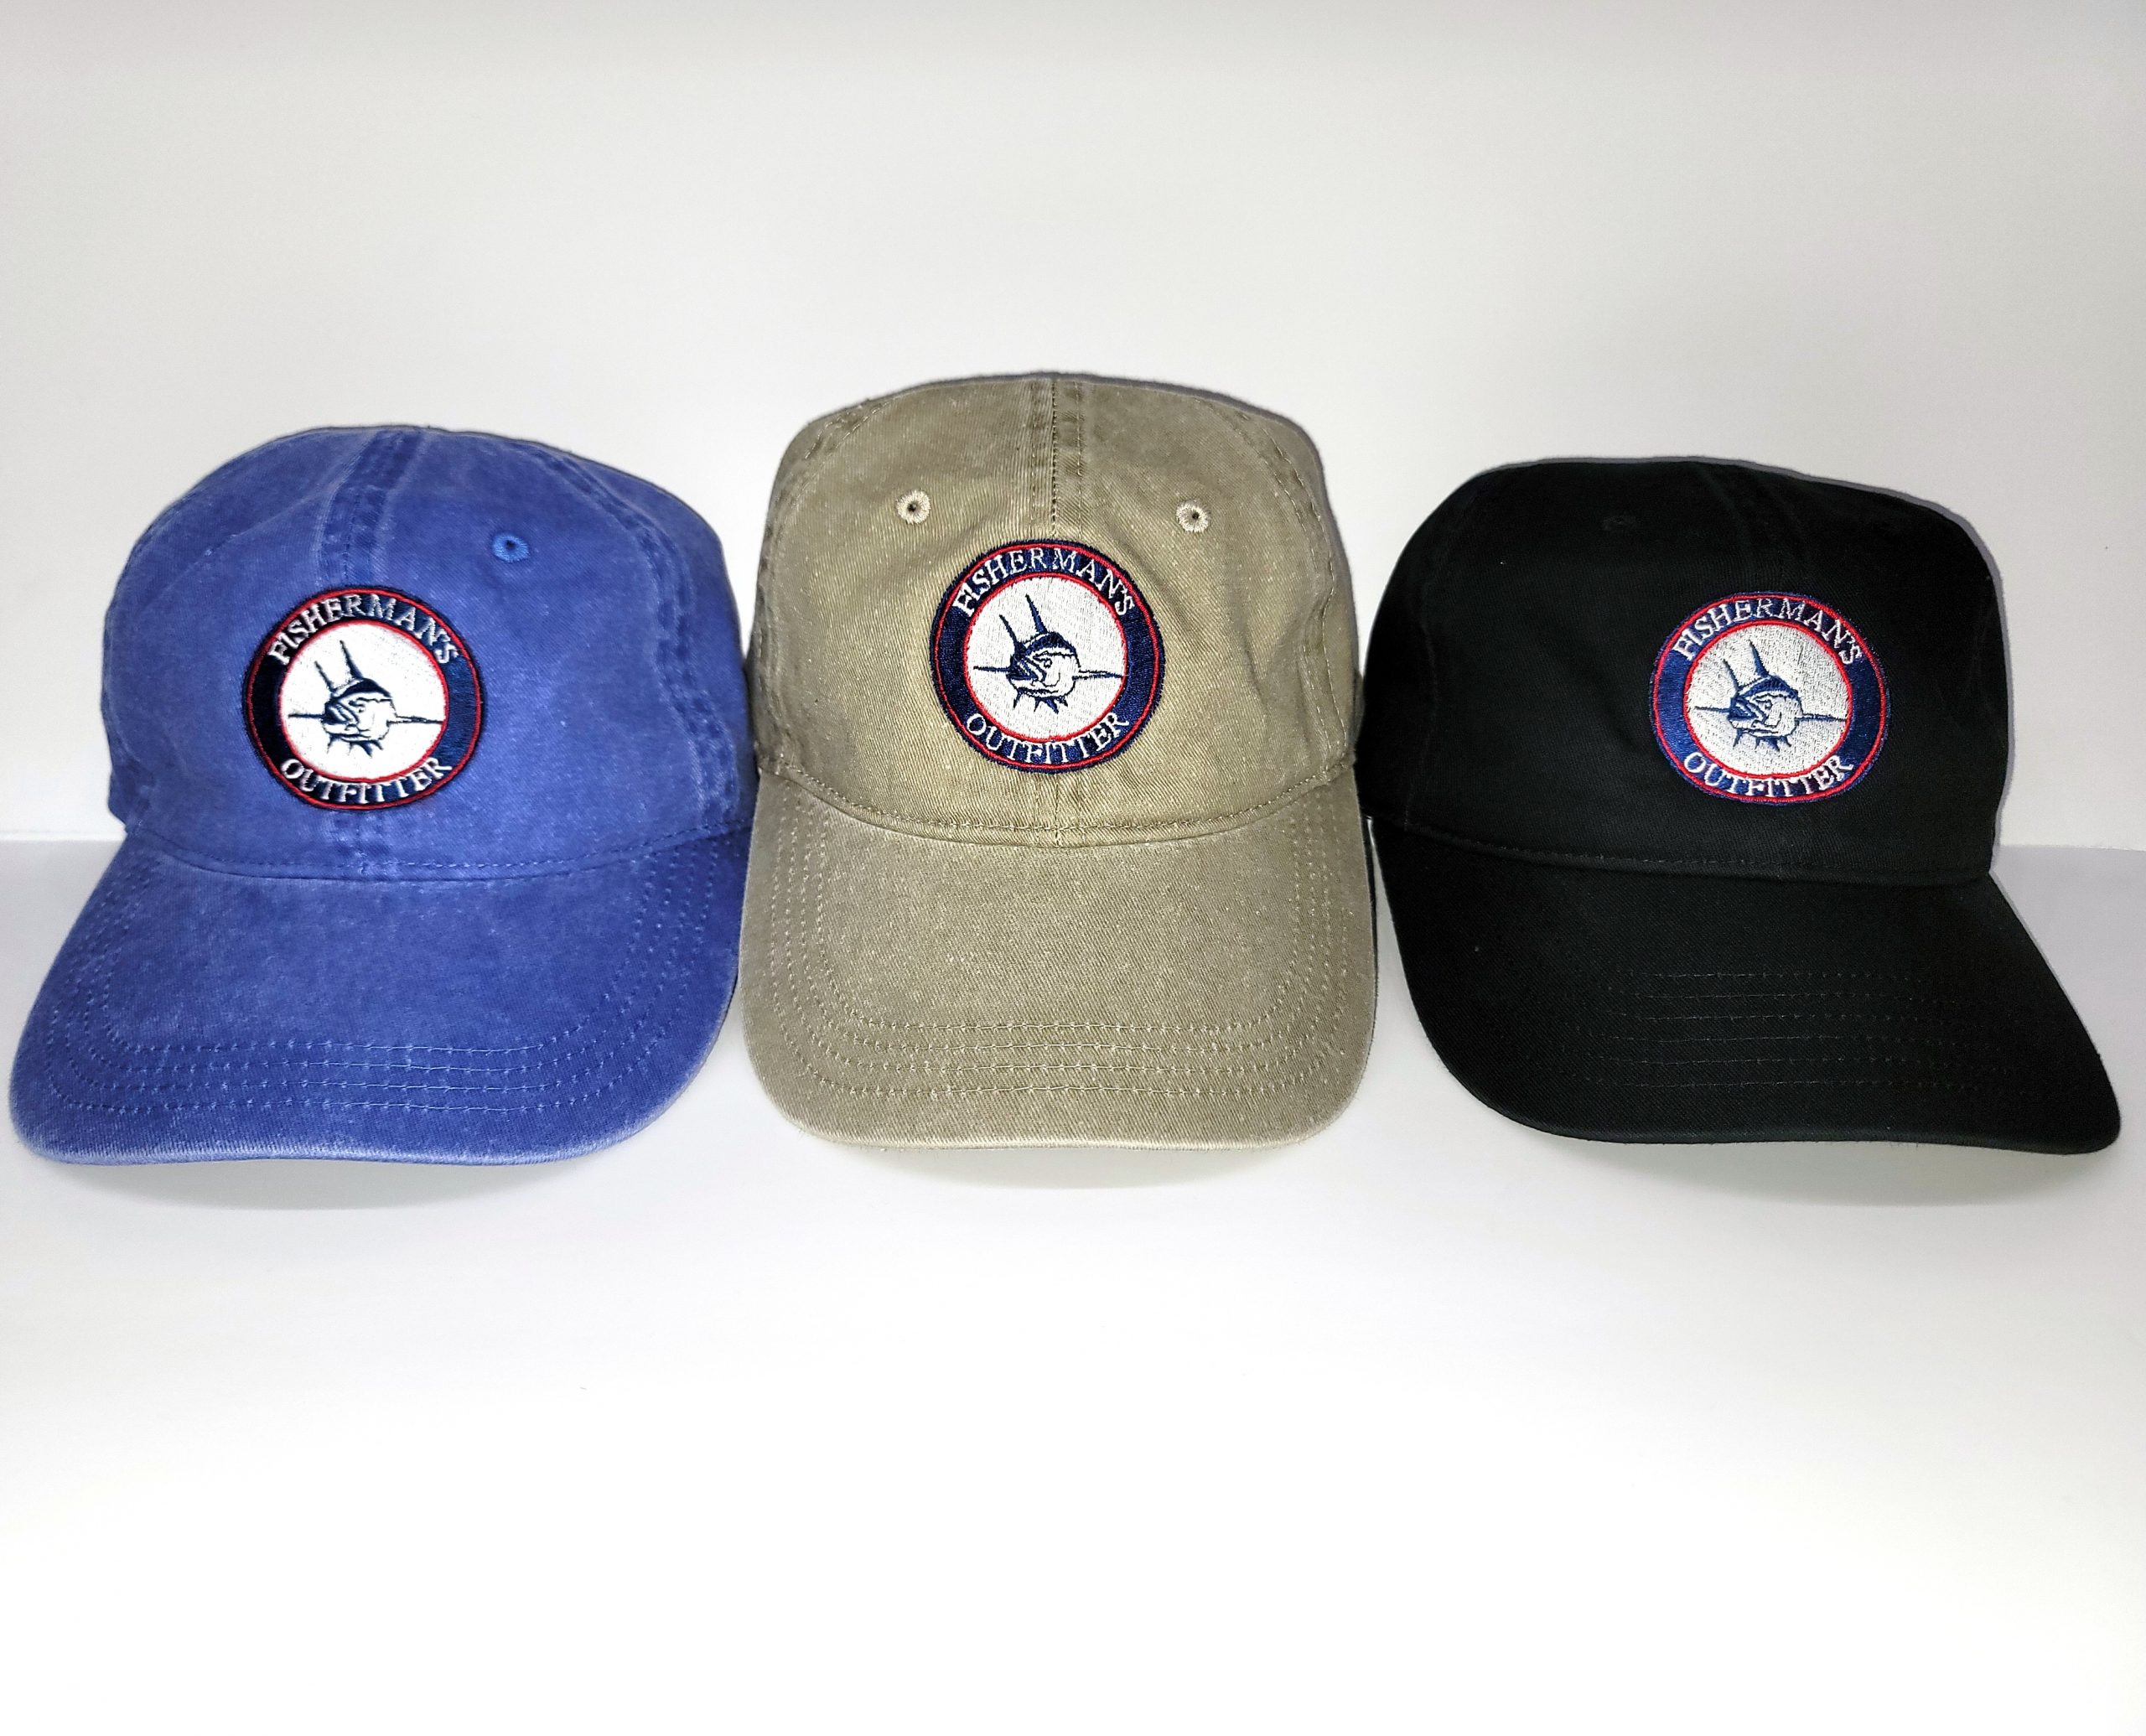 FISHERMAN'S OUTFITTER HATS - Fisherman's Outfitter